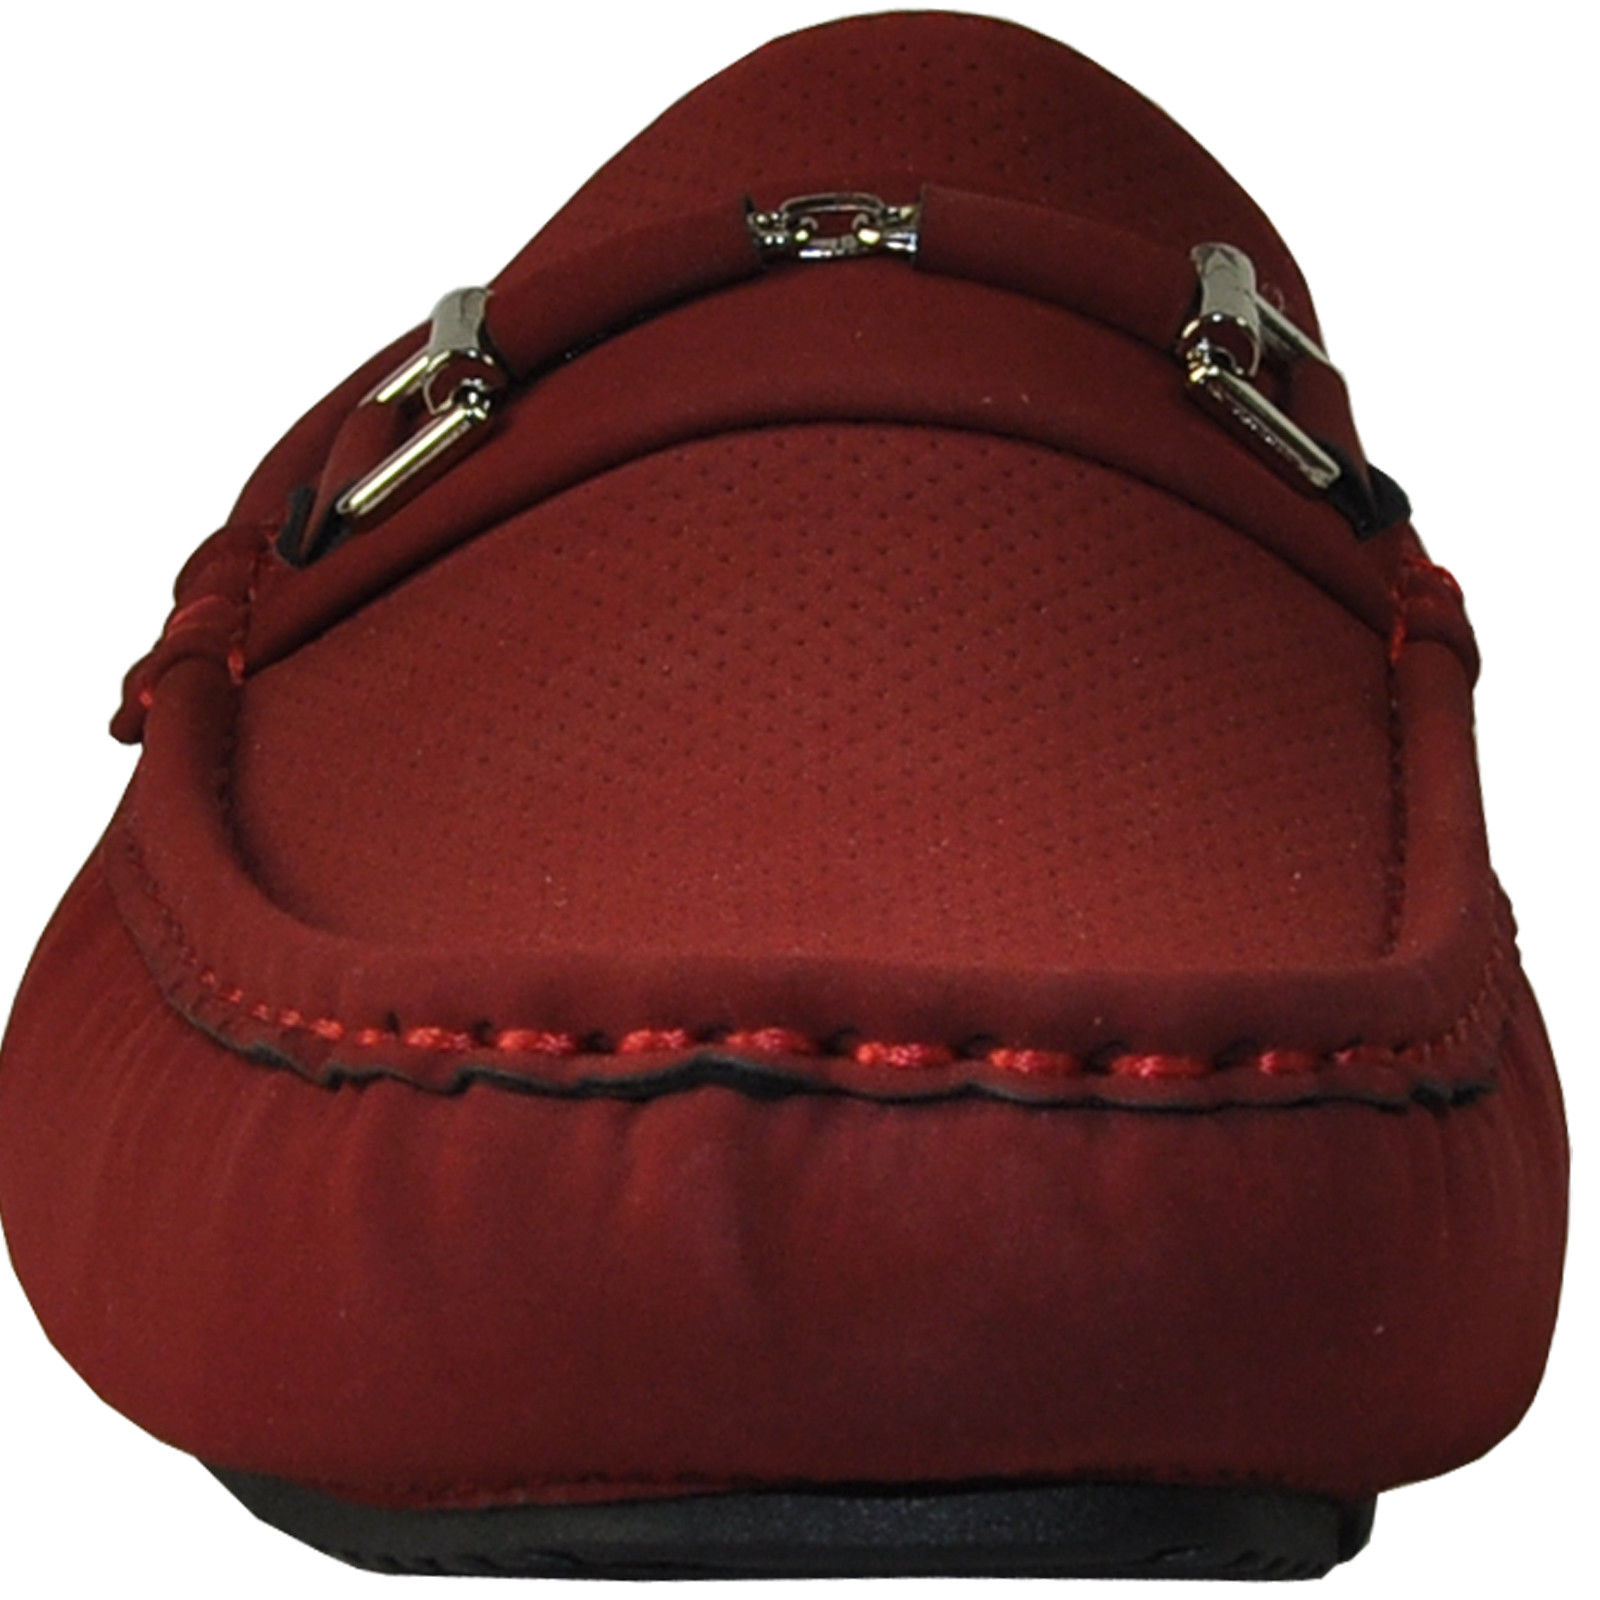 Bravo! Men Casual Shoe Todd-1 Driving Moccasin Red 10M US - image 2 of 7